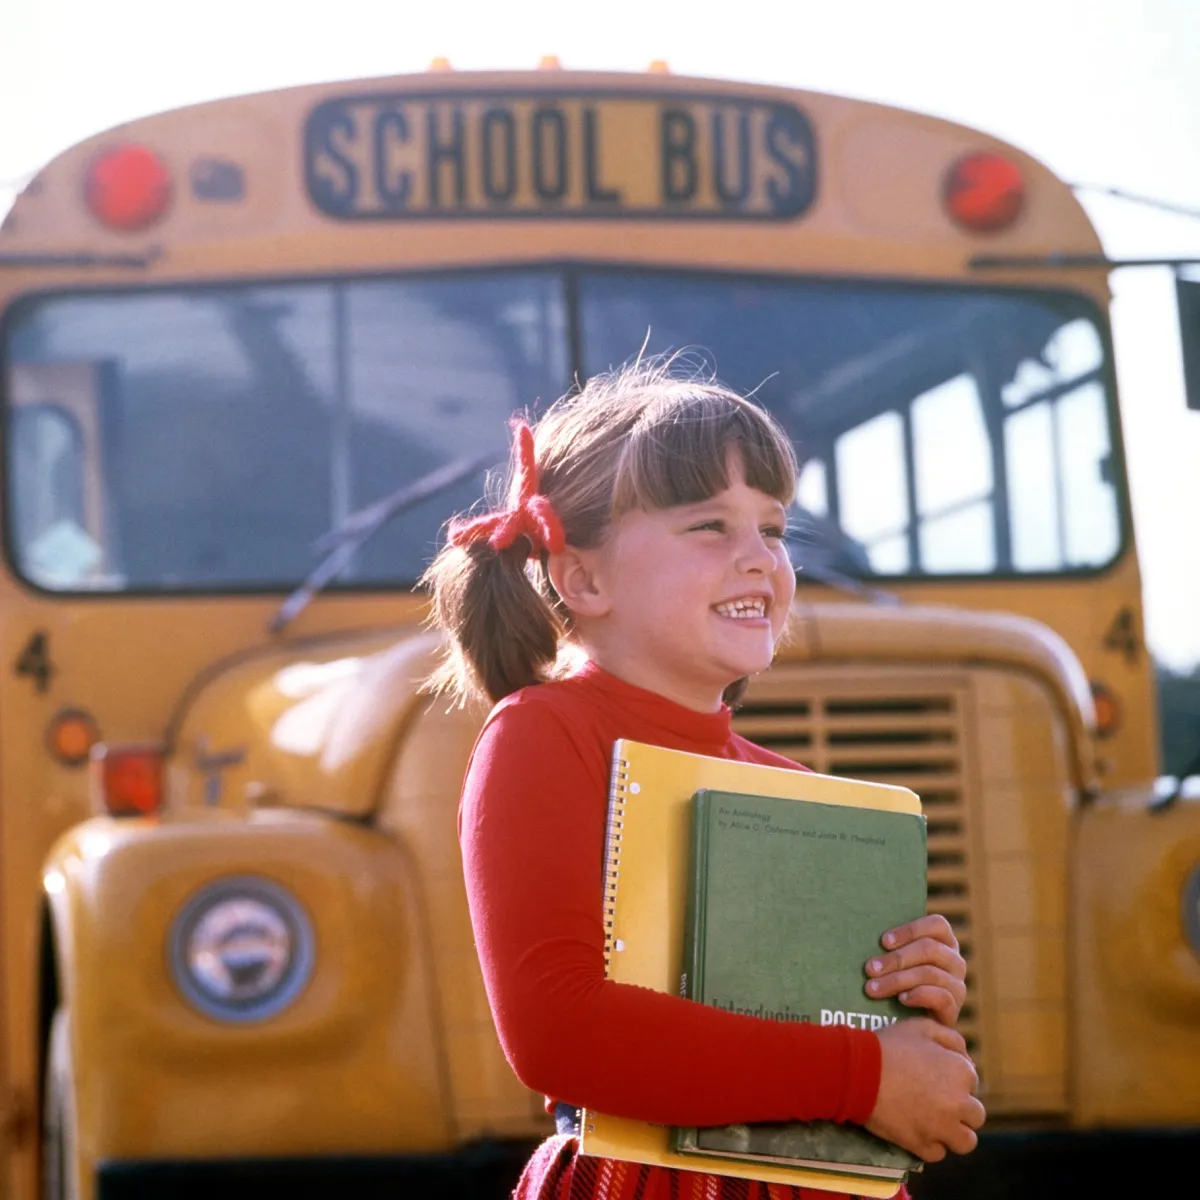 1970s SMILING ELEMENTARY SCHOOL GIRL STANDING FRONT OF BUS CARRYING BOOKS SMILING